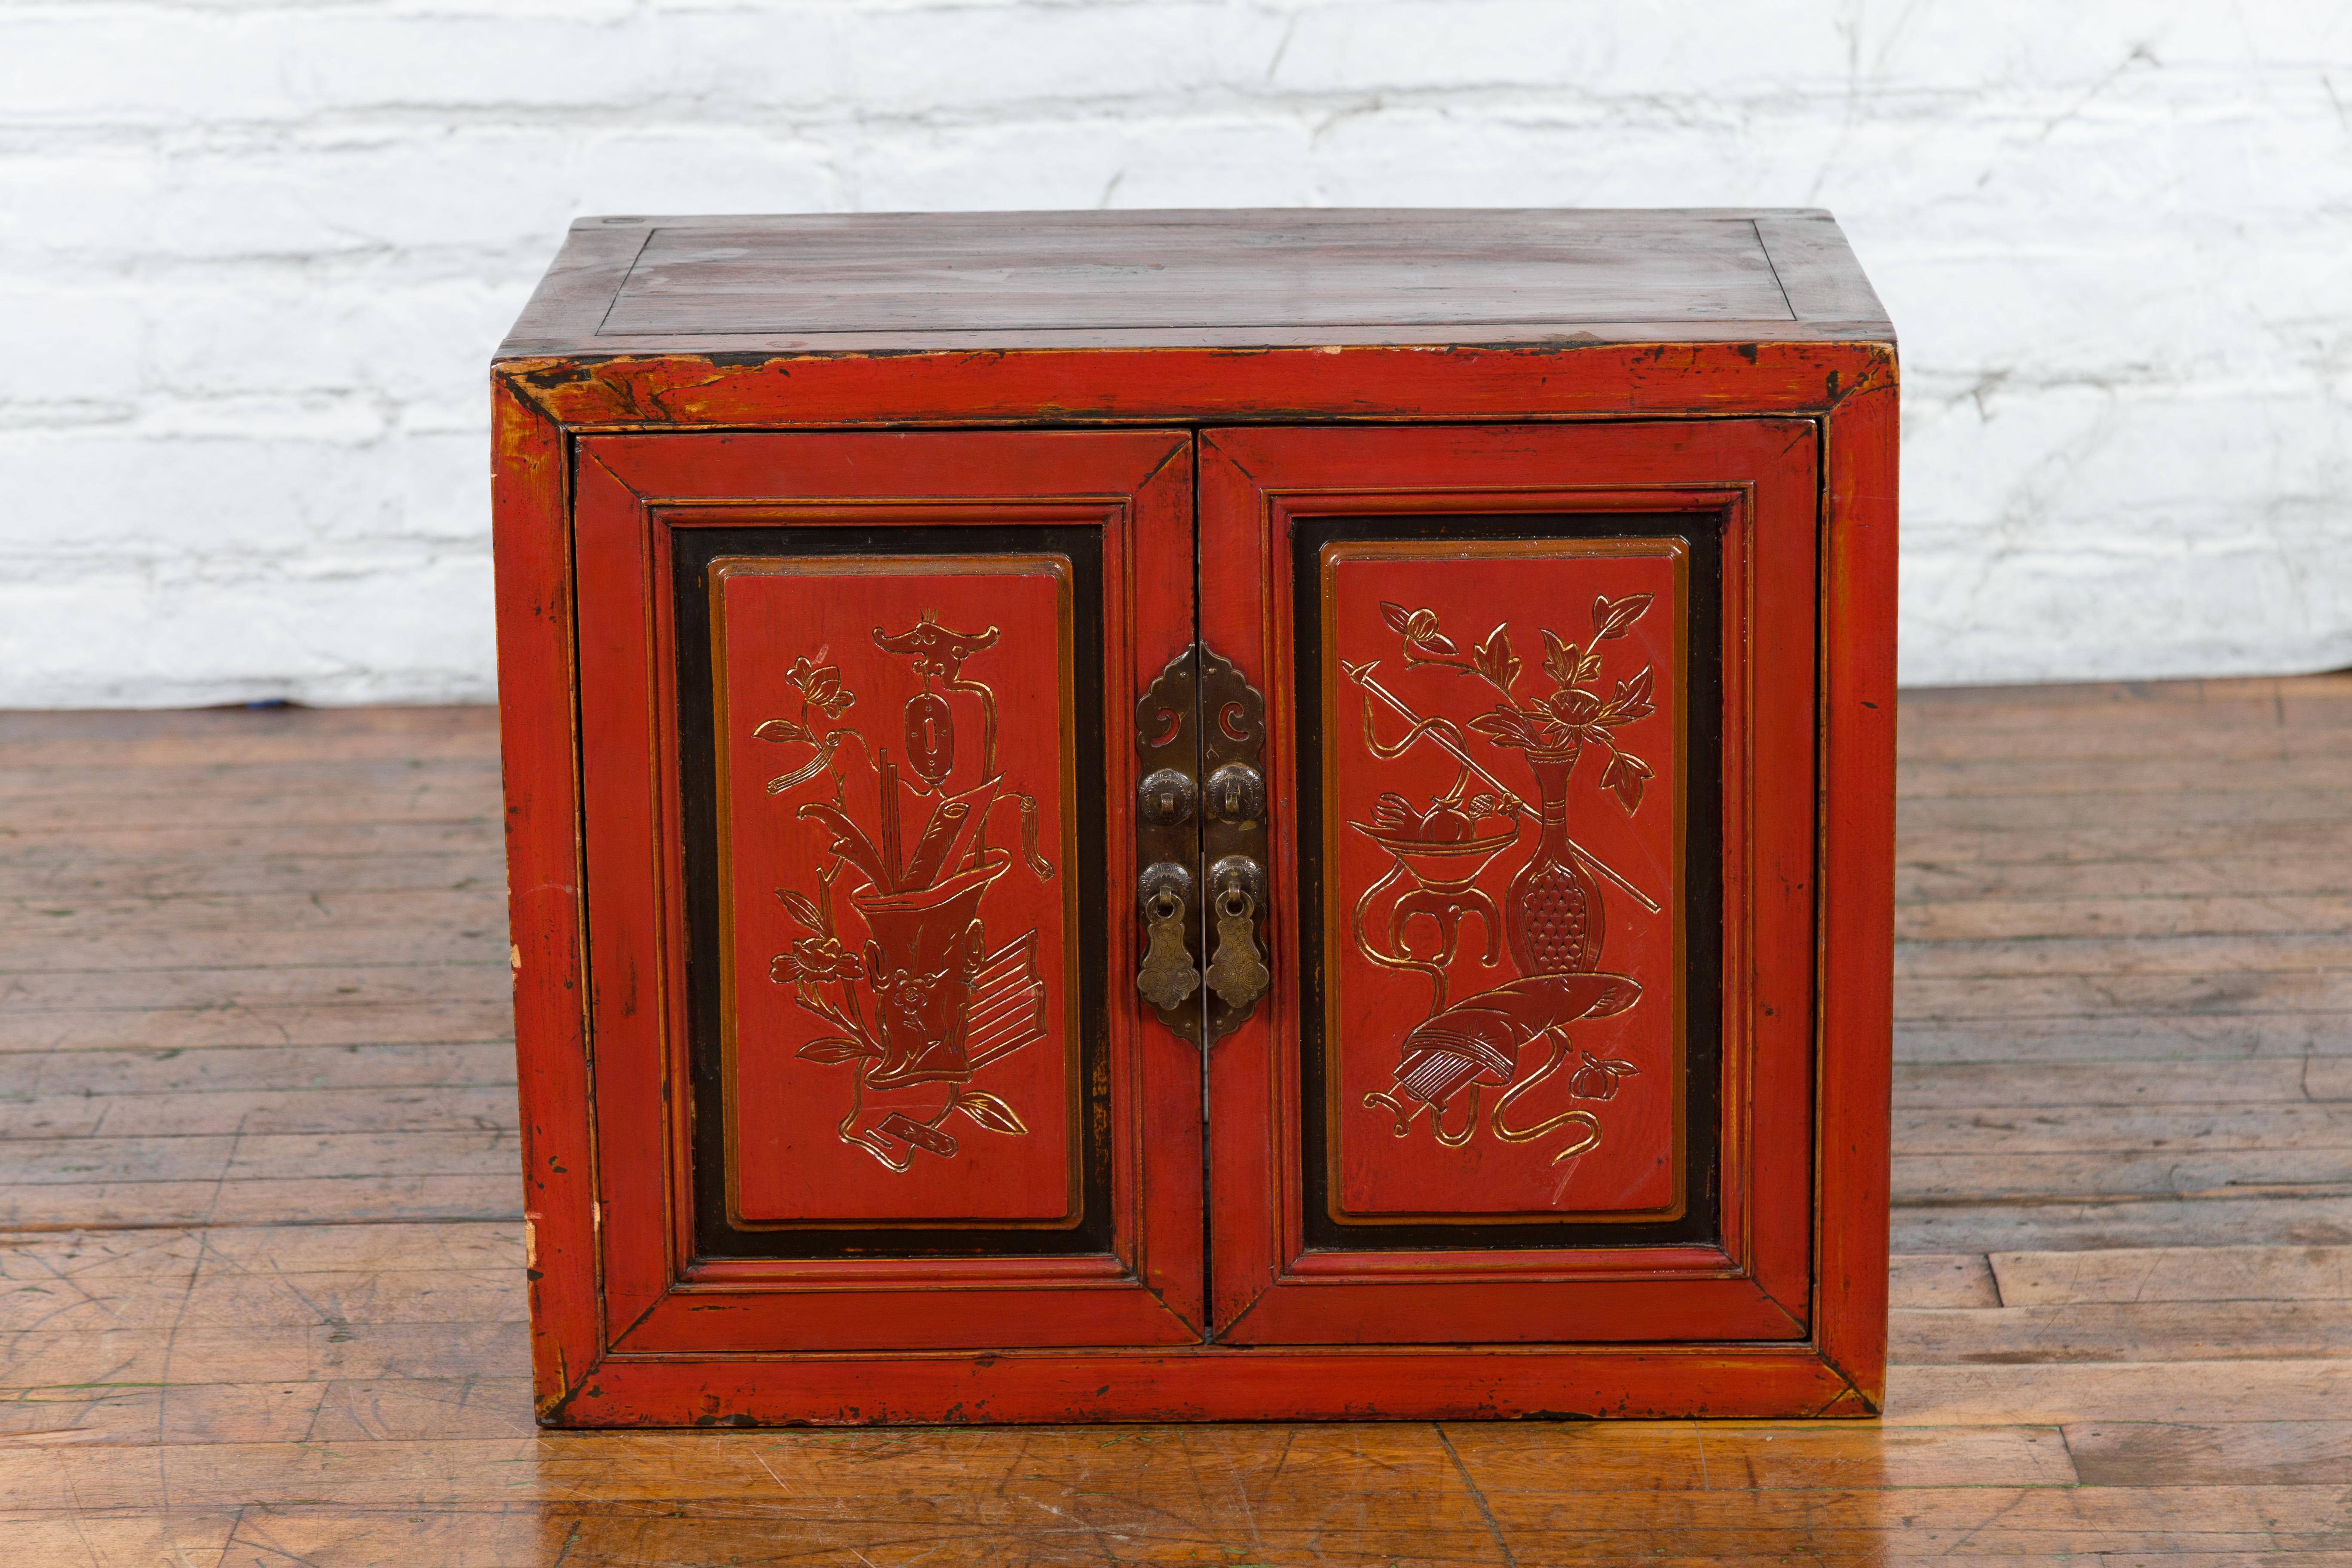 A Chinese Qing Dynasty period red lacquer cabinet from the 19th century, with hand-carved doors. Created in China during the Qing Dynasty, this cabinet features a traditional linear shape perfectly complimented by a red lacquer with some black